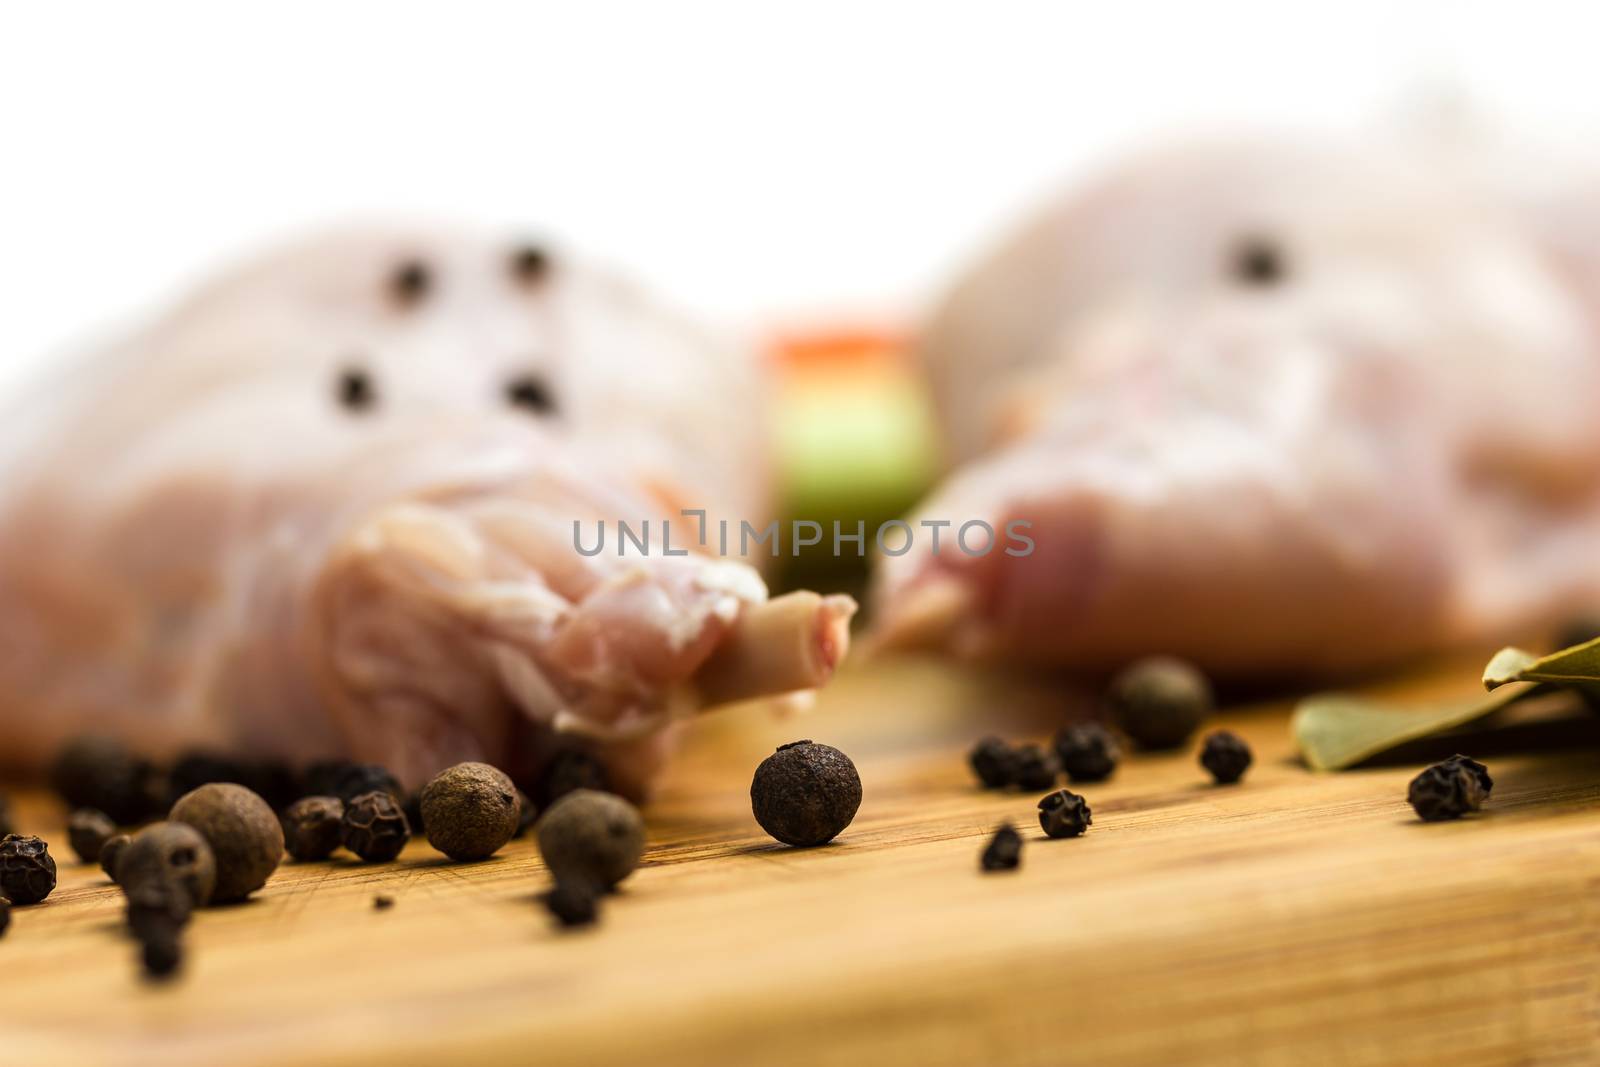 Raw rabbit with black pepper and allspice